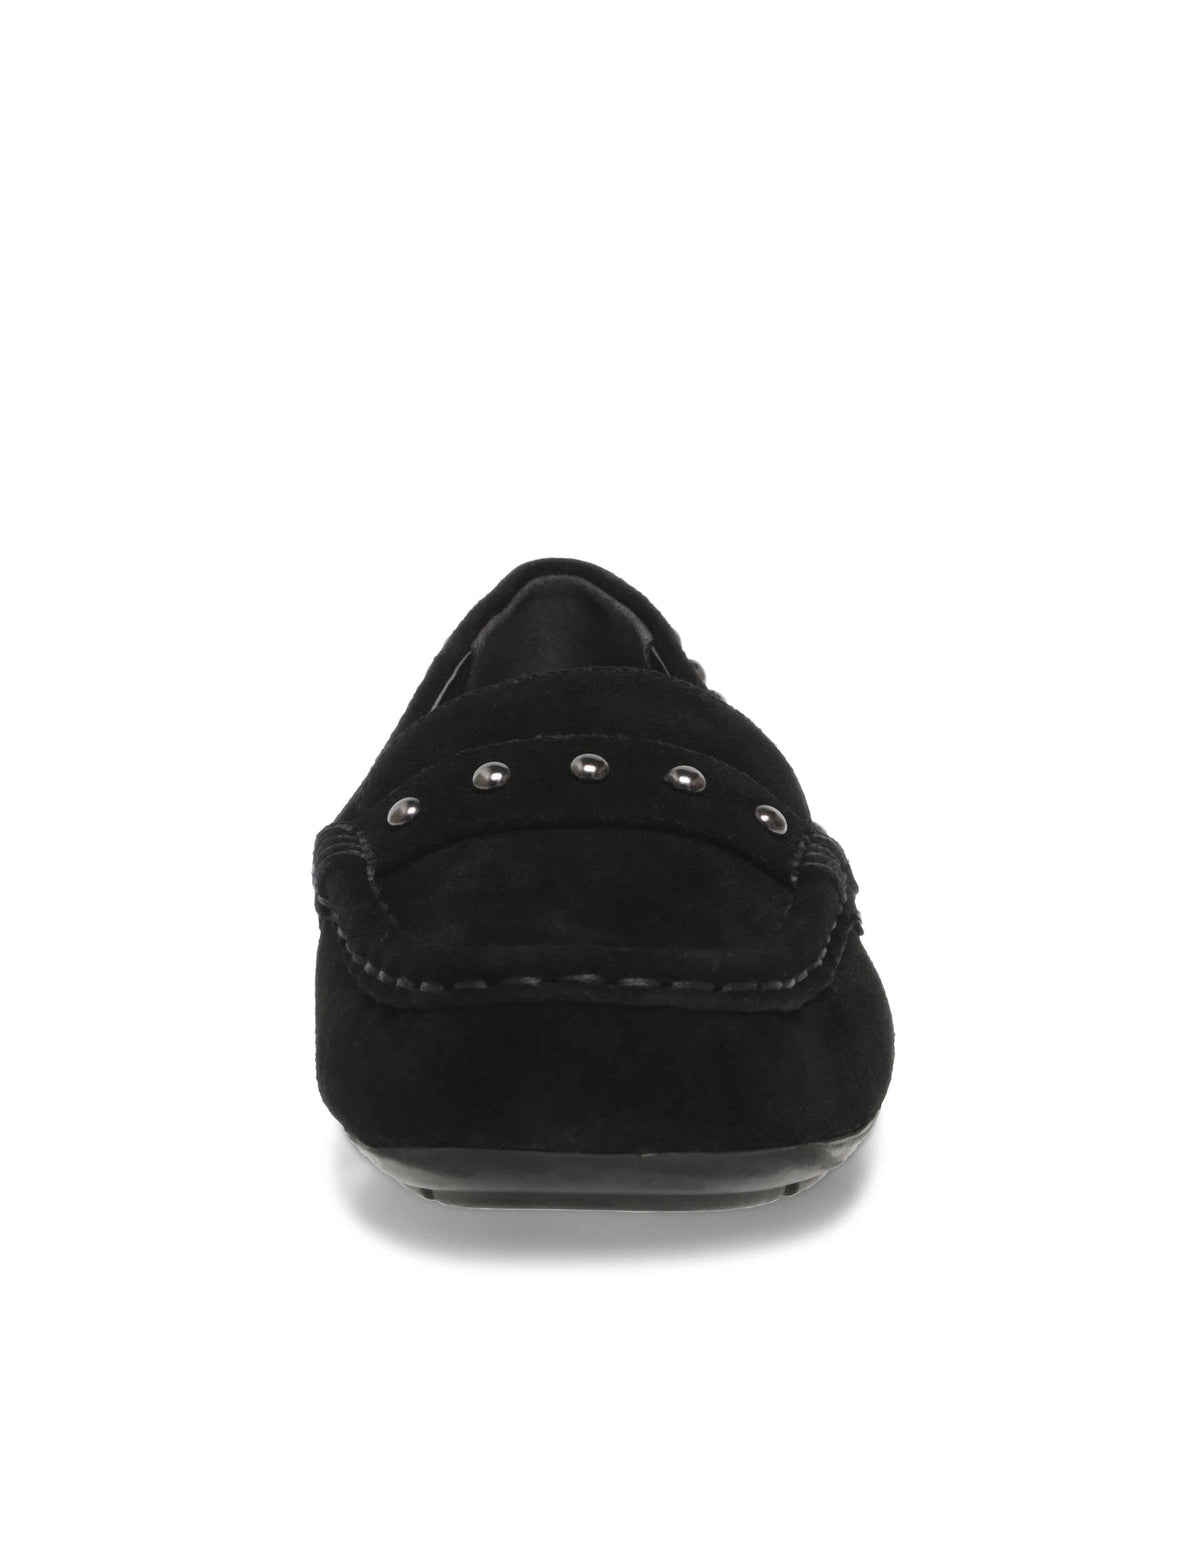 On It Studded Suede Loafer